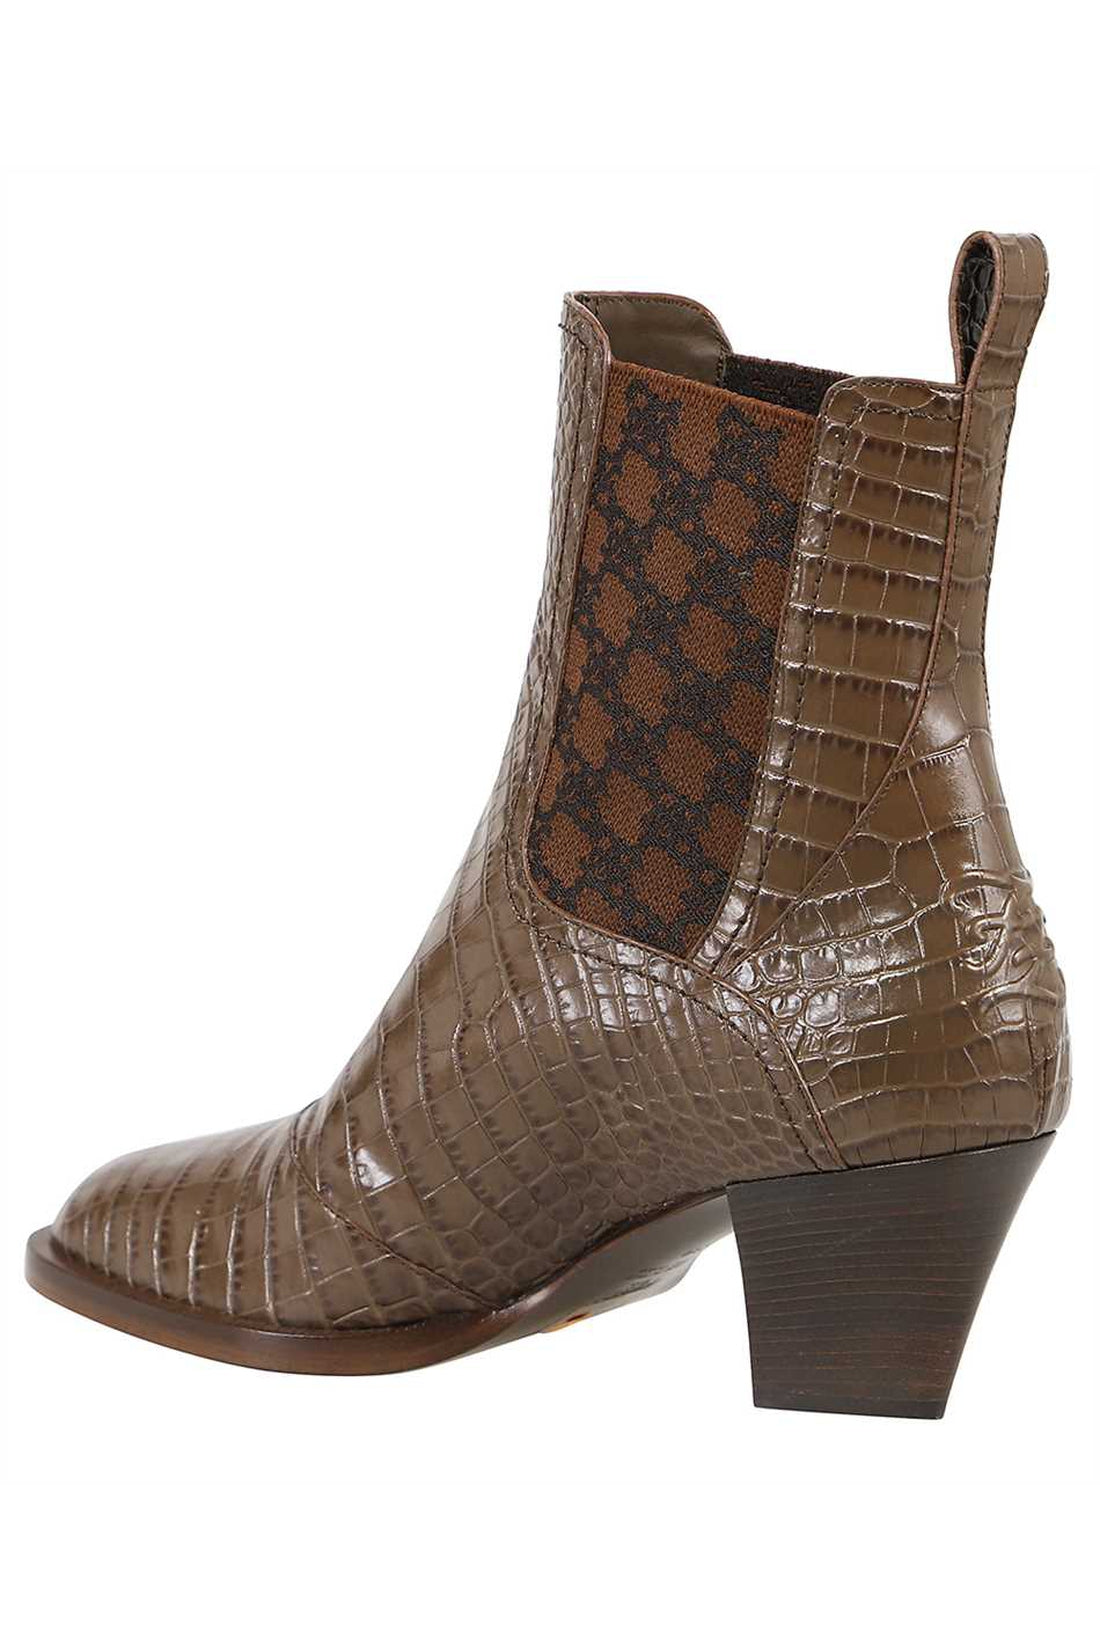 Fendi-OUTLET-SALE-Fendi Karligraphy leather ankle boots-ARCHIVIST